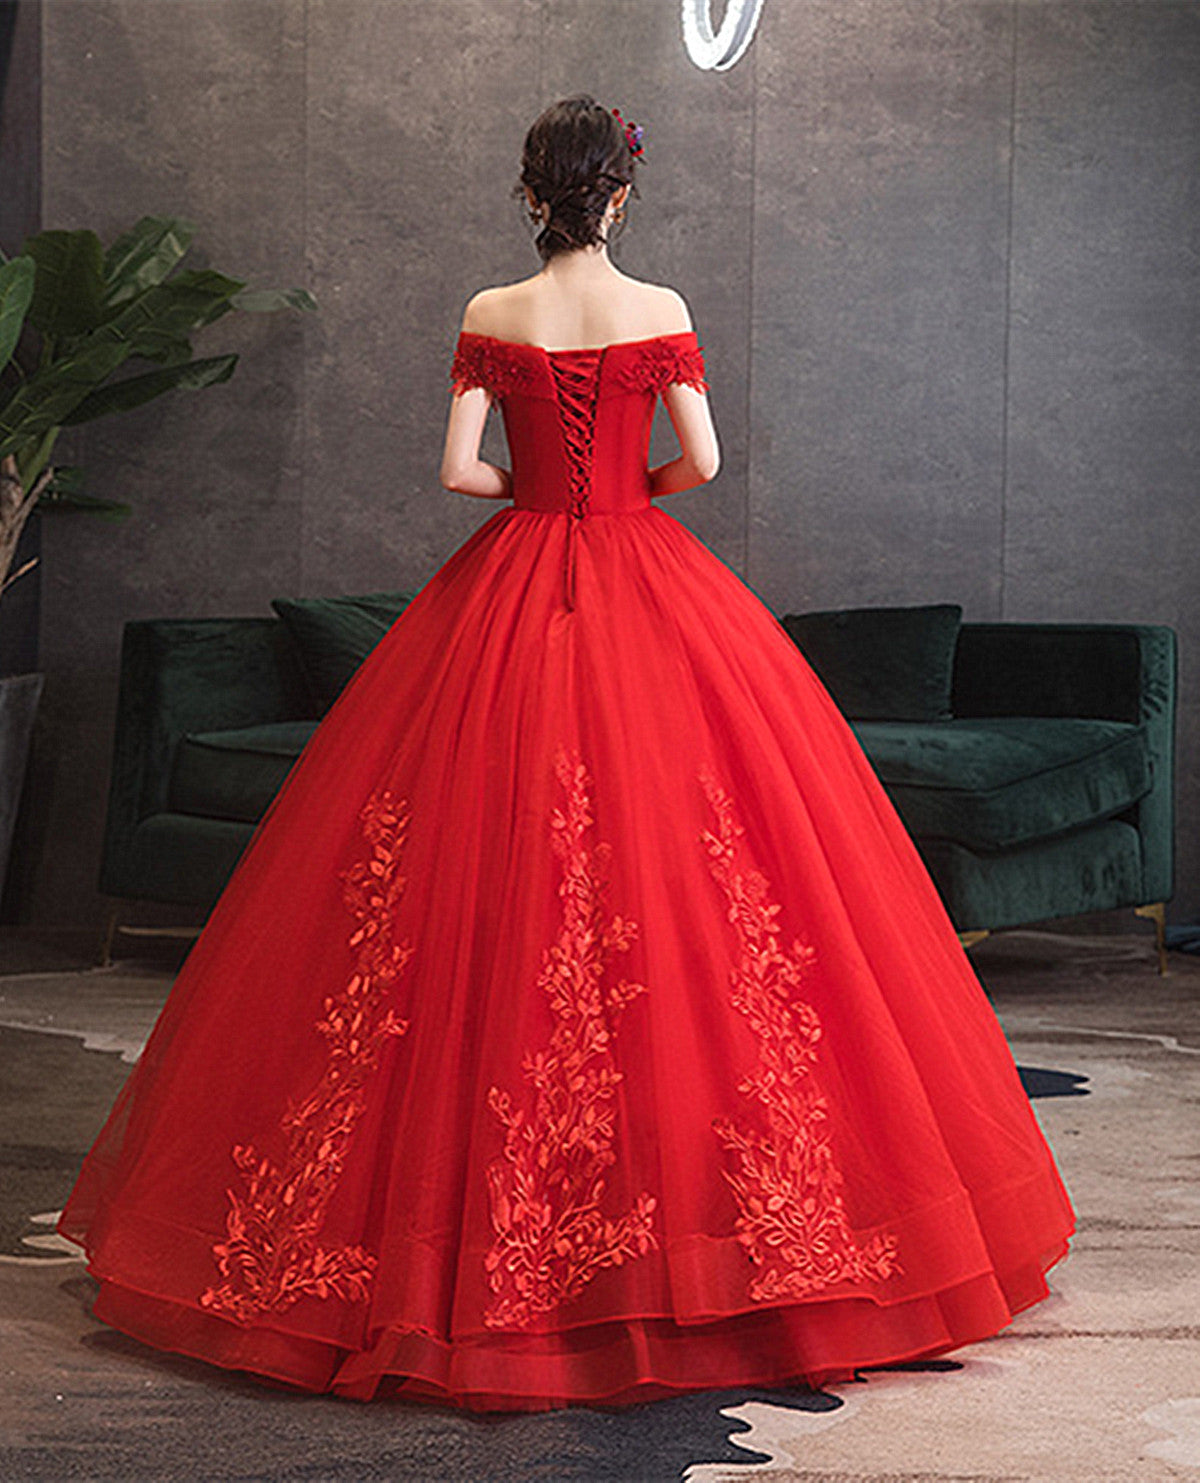 Red Tulle Ball Gown with Lace Sweetheart Long Formal Dress, Red Tulle Evening Dress